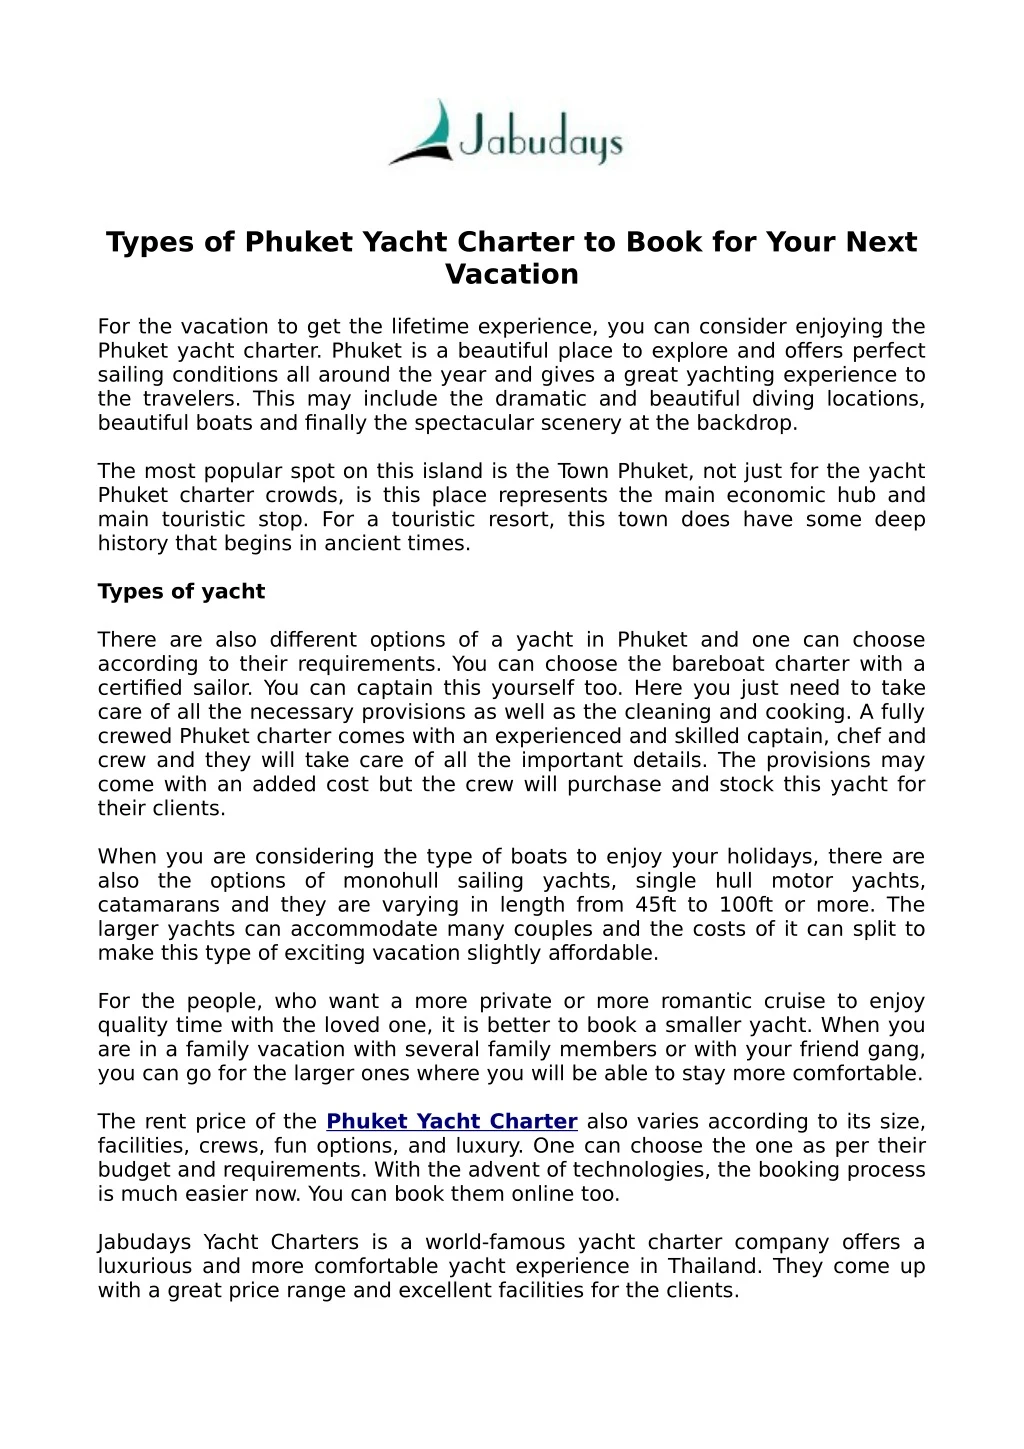 types of phuket yacht charter to book for your